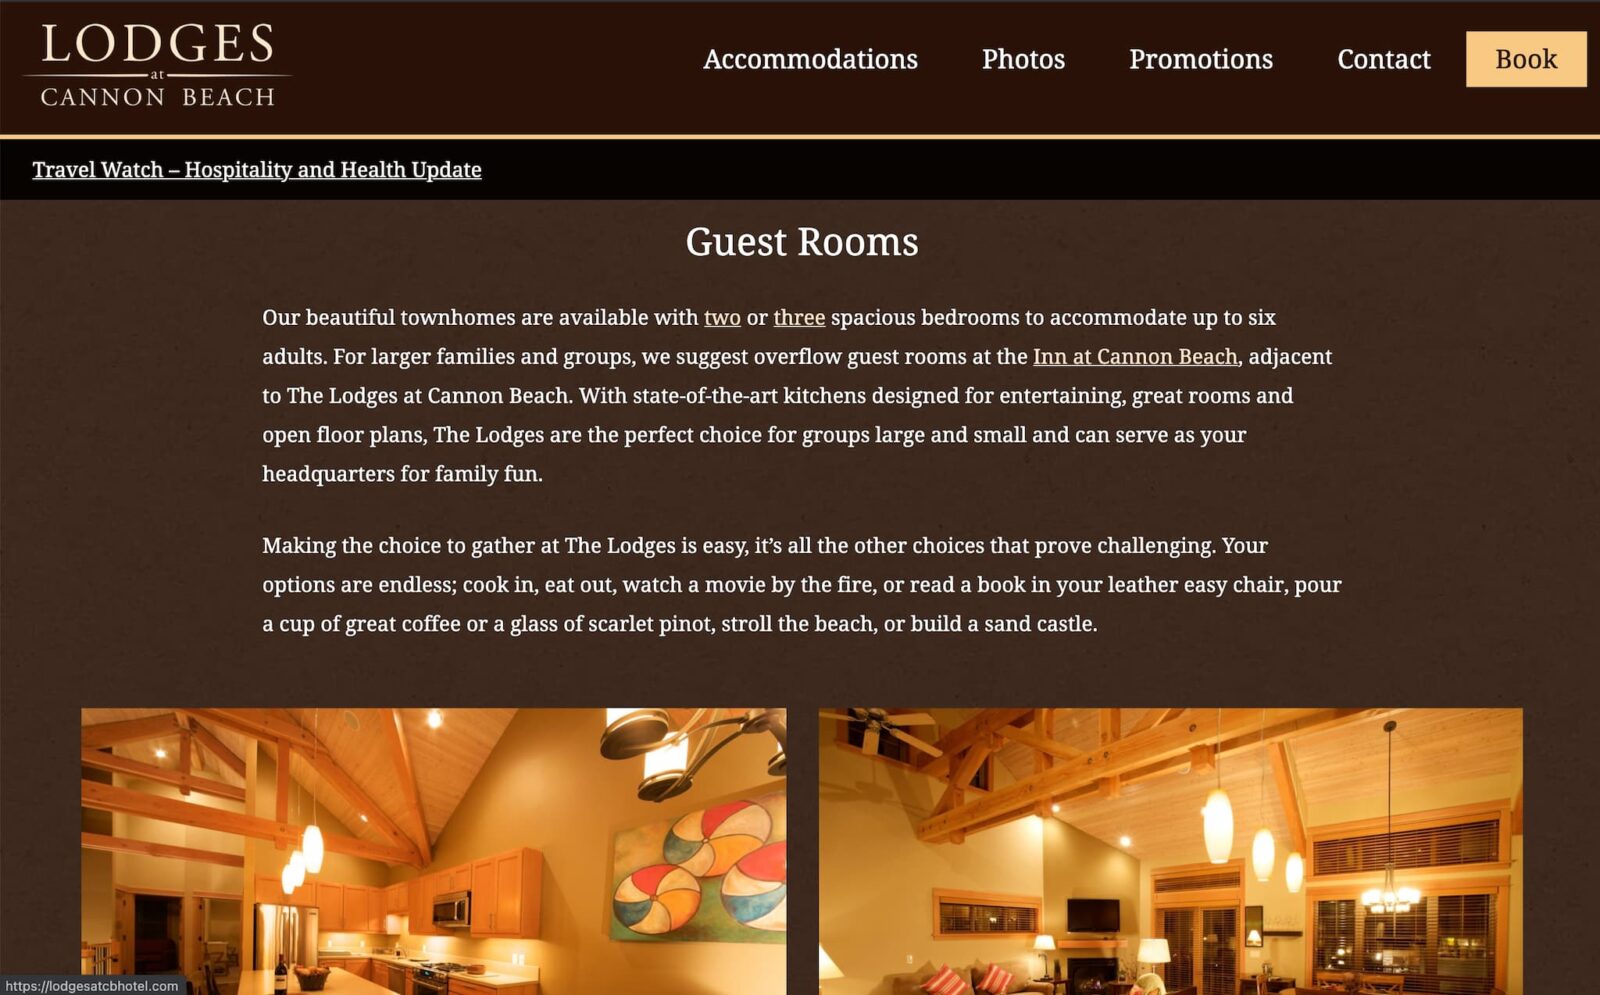 Guest rooms at the Lodges at Cannon Beach